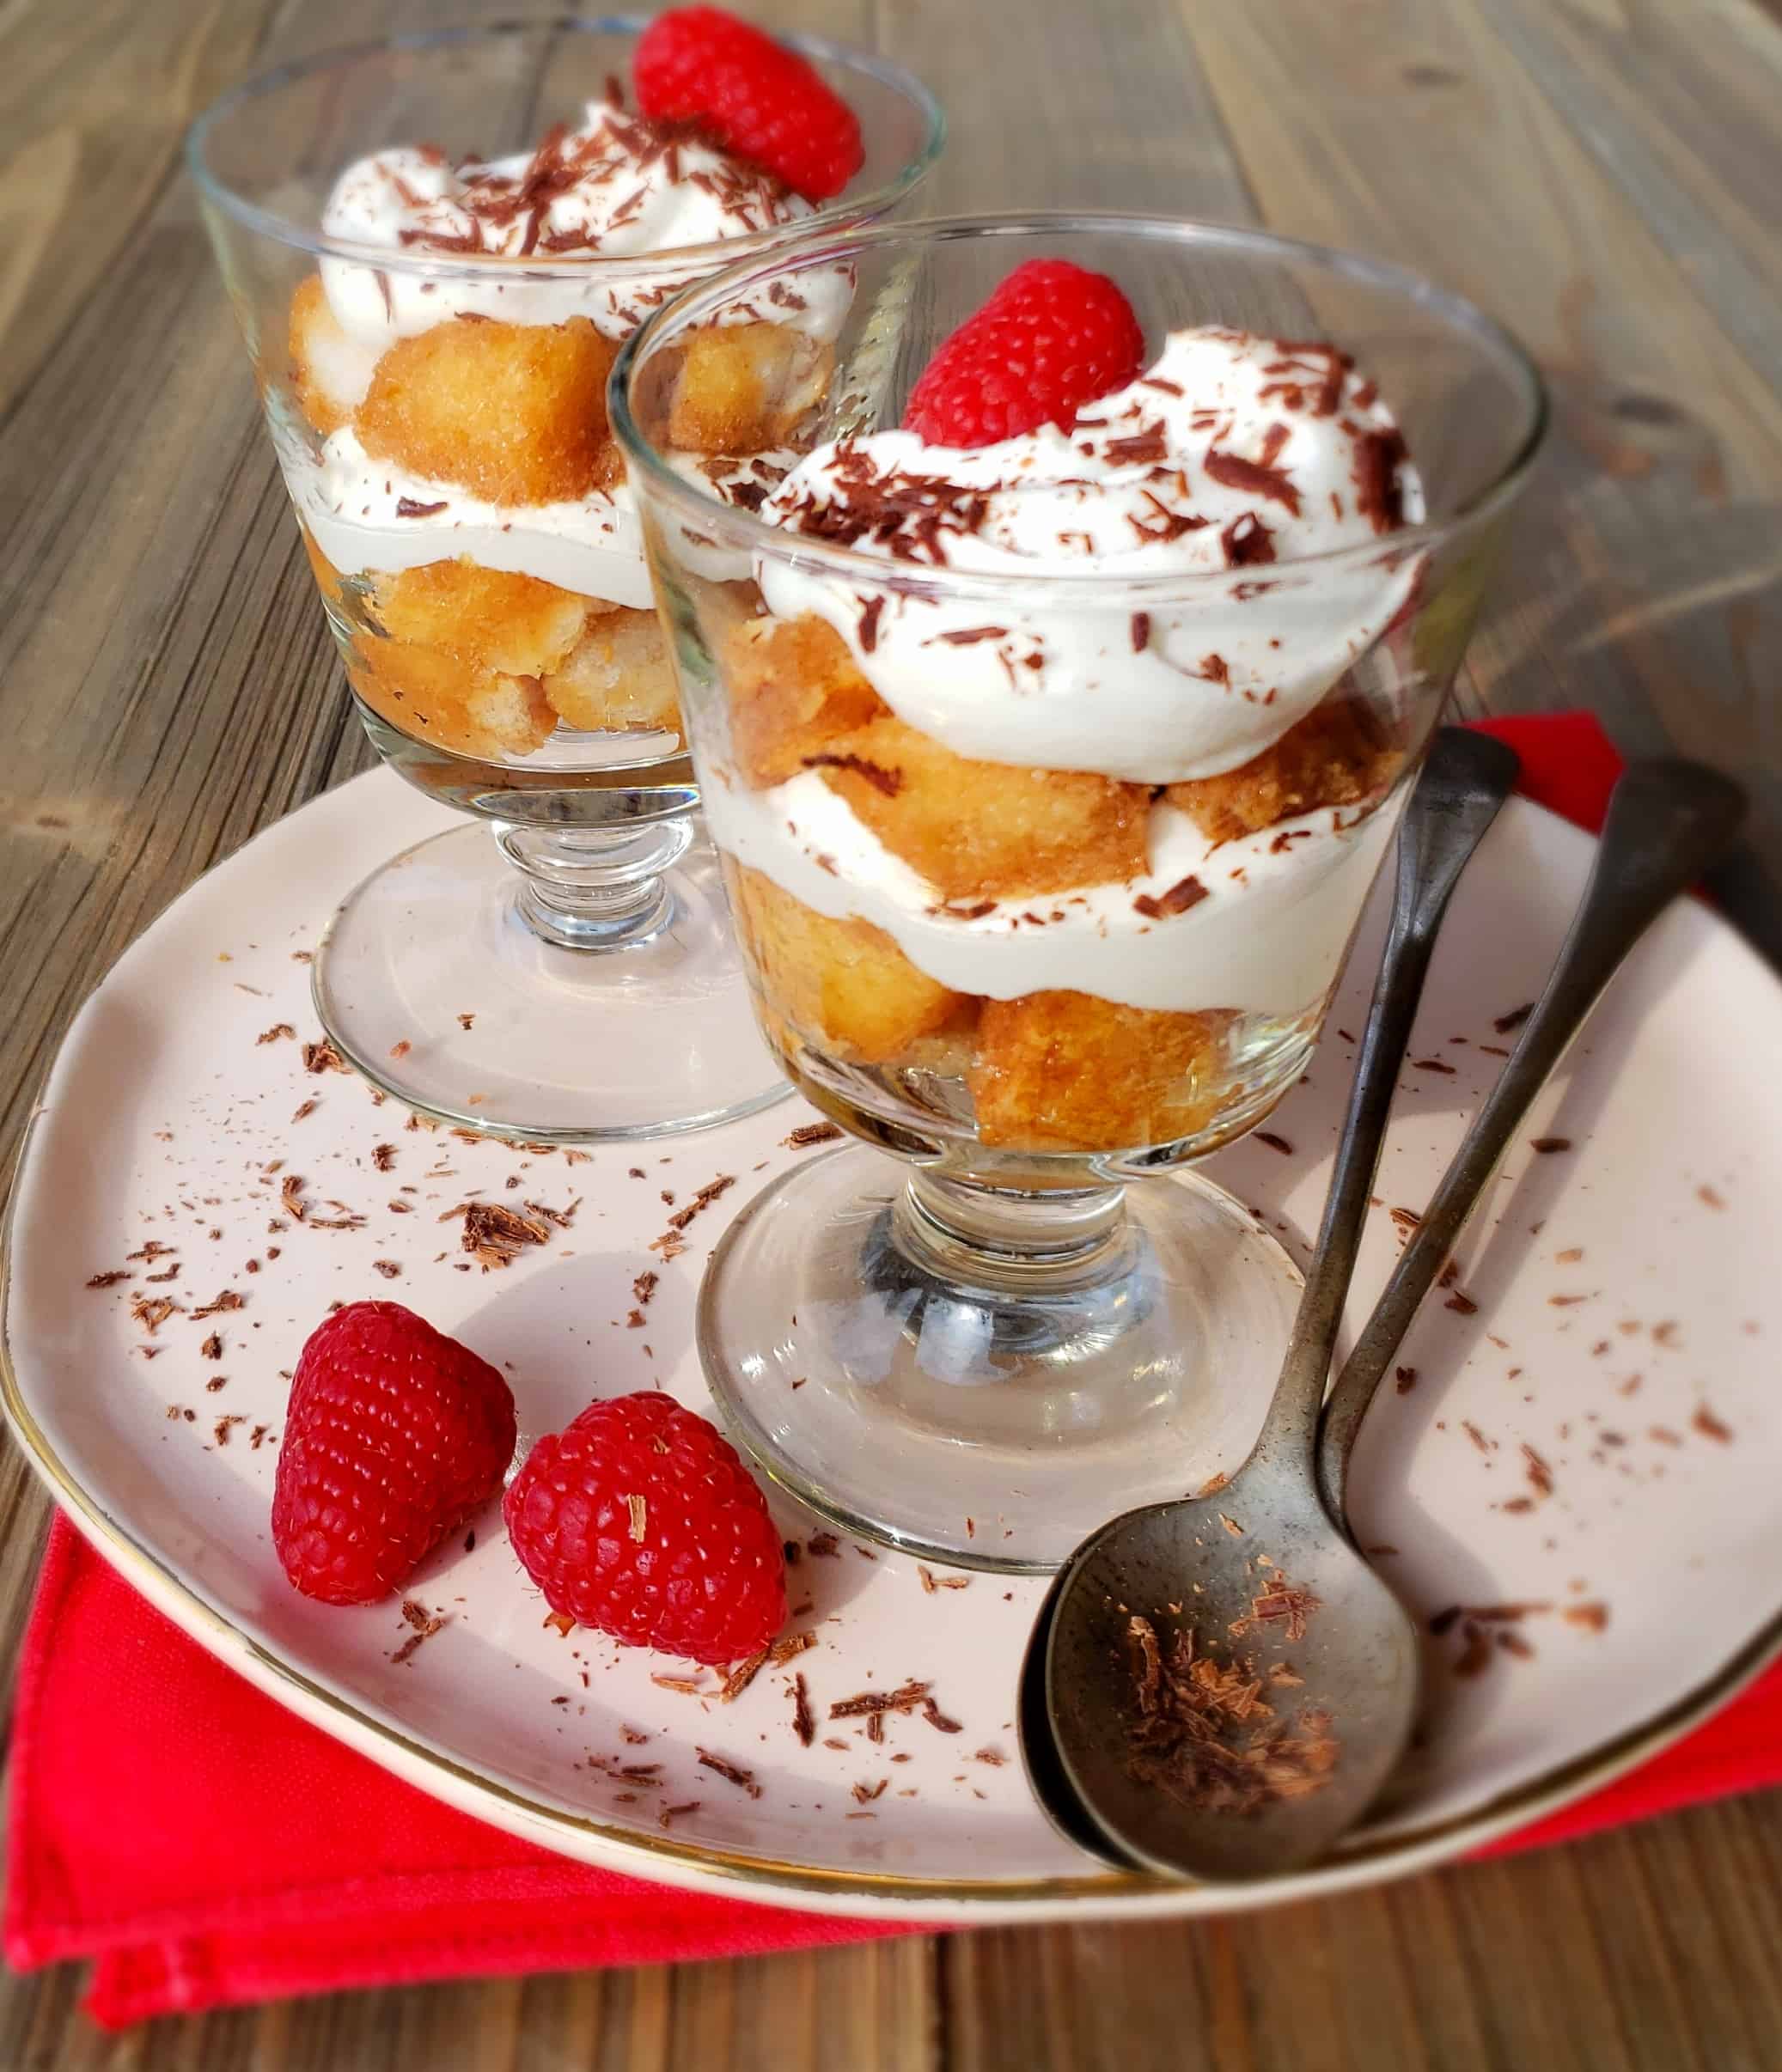 Two parfait glasses layered with tea soaked cake, whipped cream, and topped with raspberries and grated chocolate